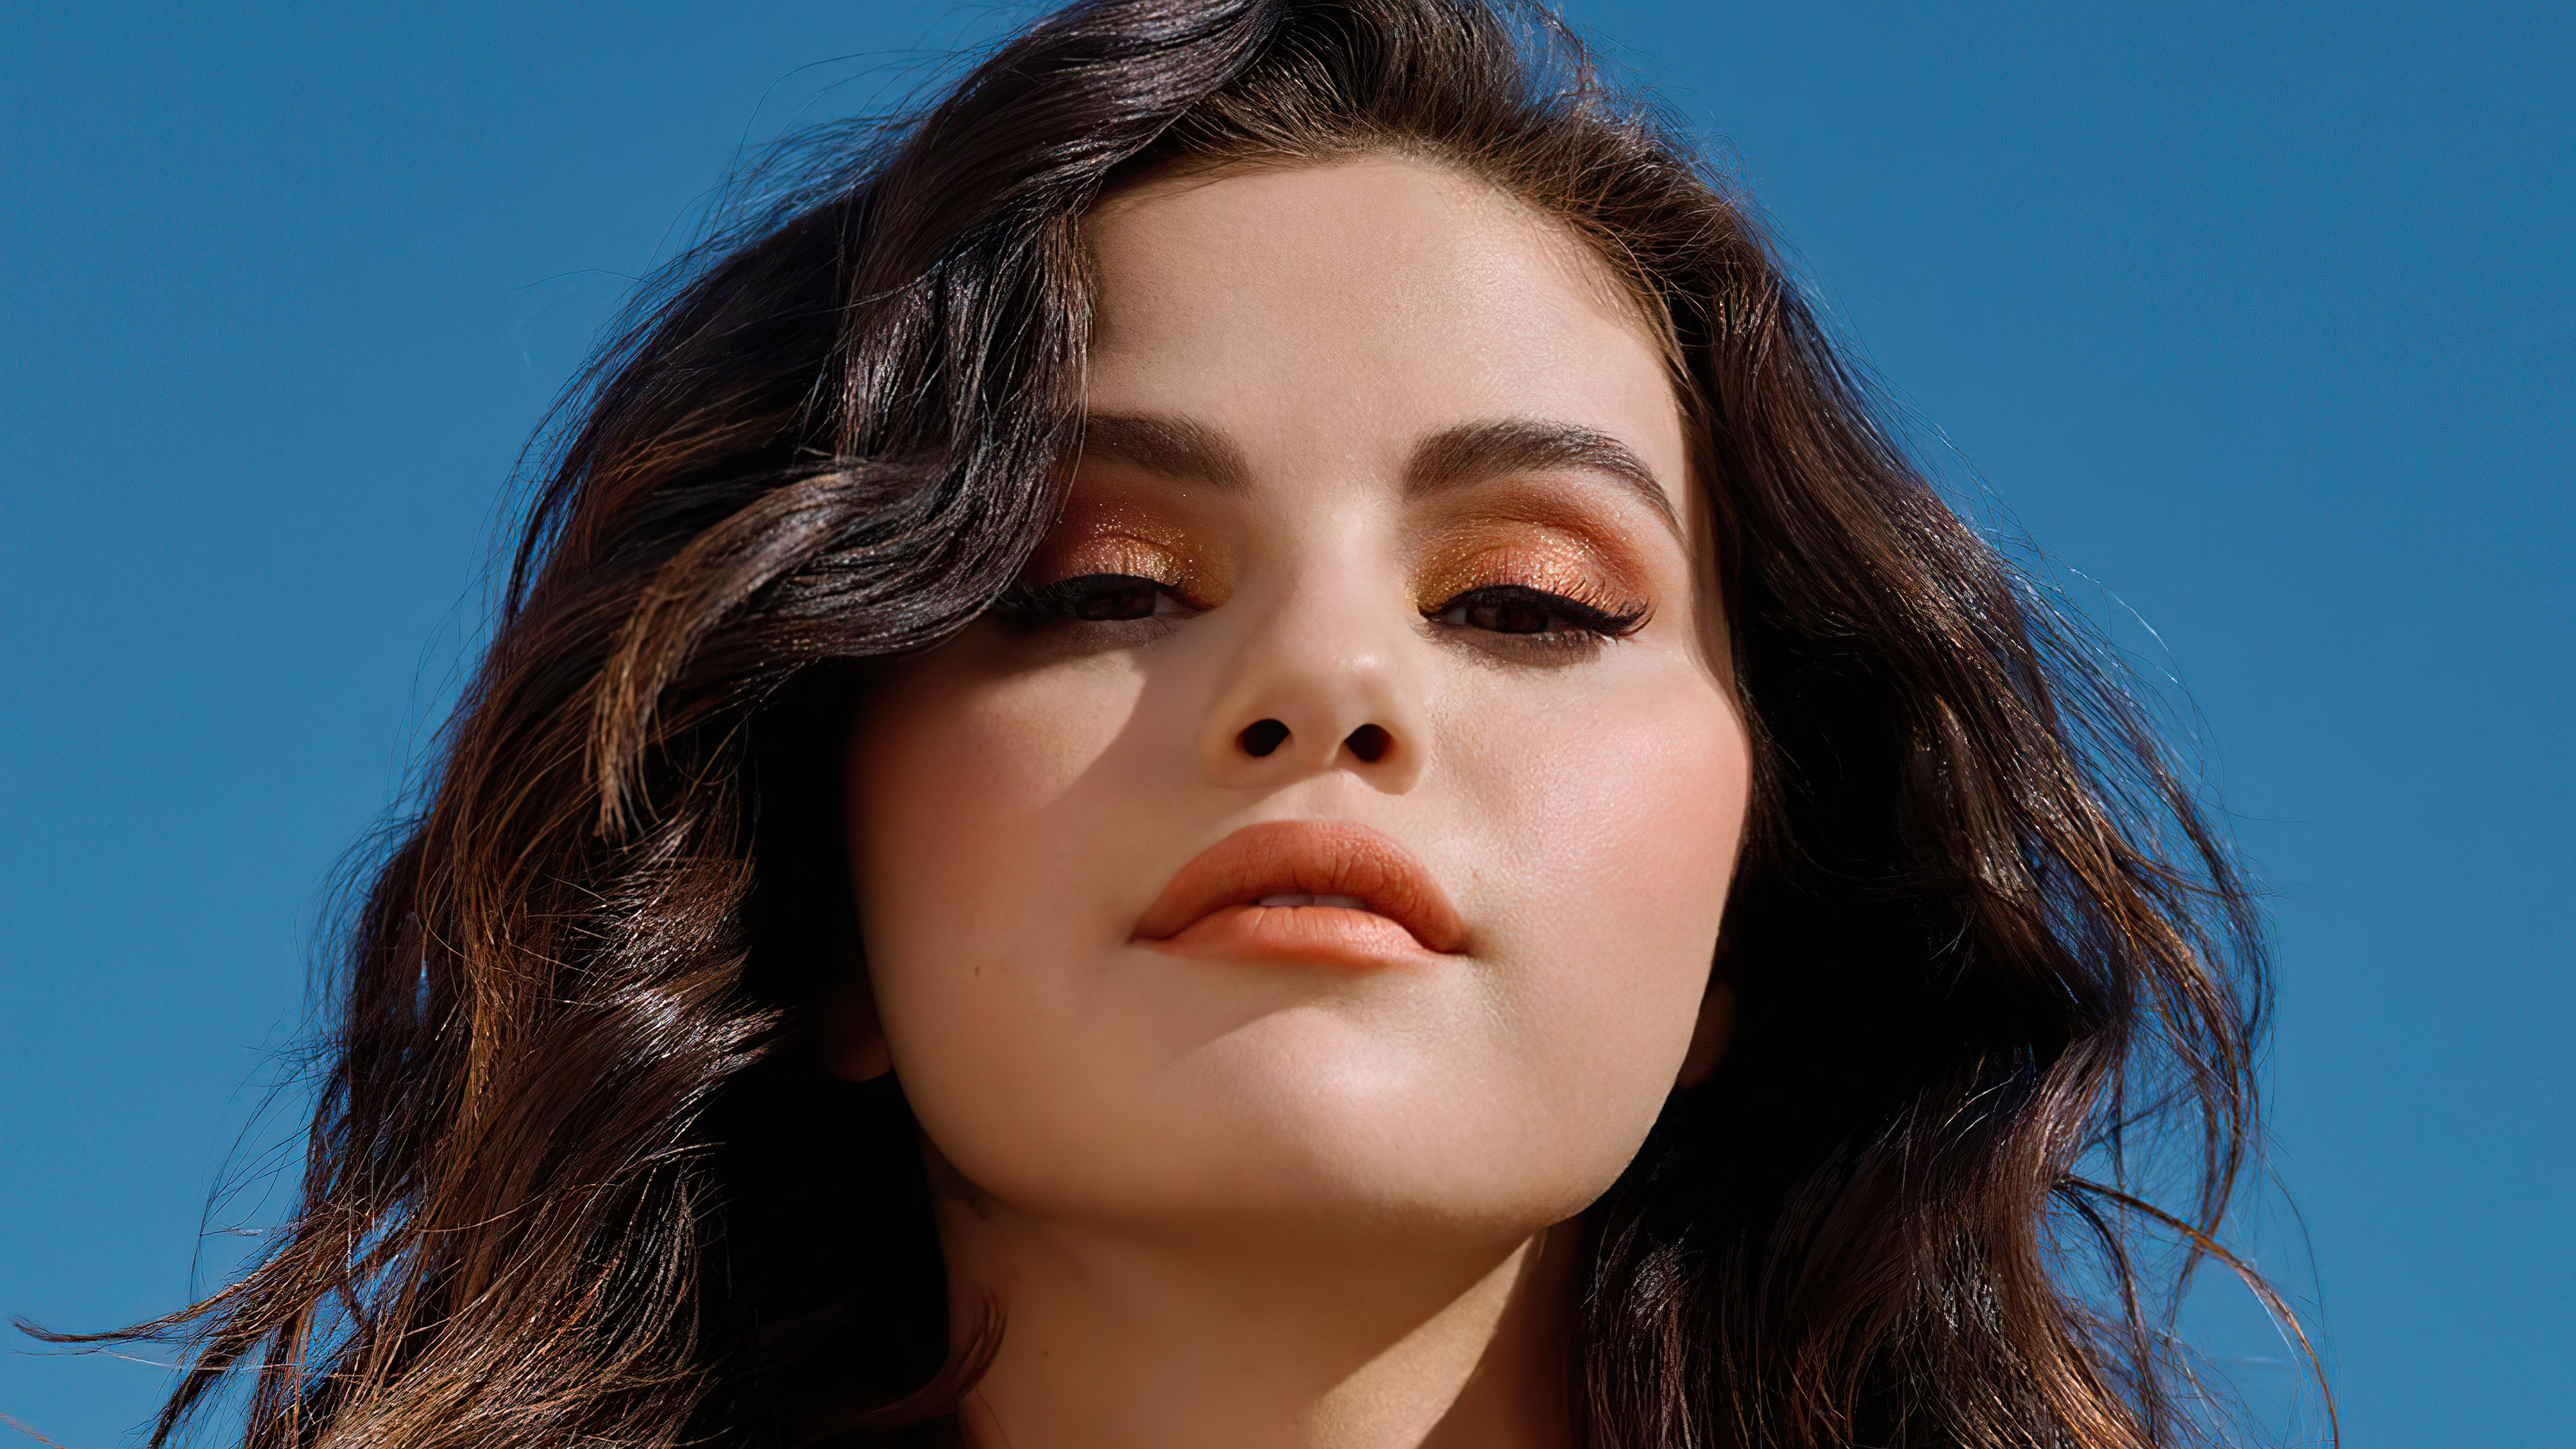 Selena gomez rare beauty hd music k wallpapers images backgrounds photos and pictures